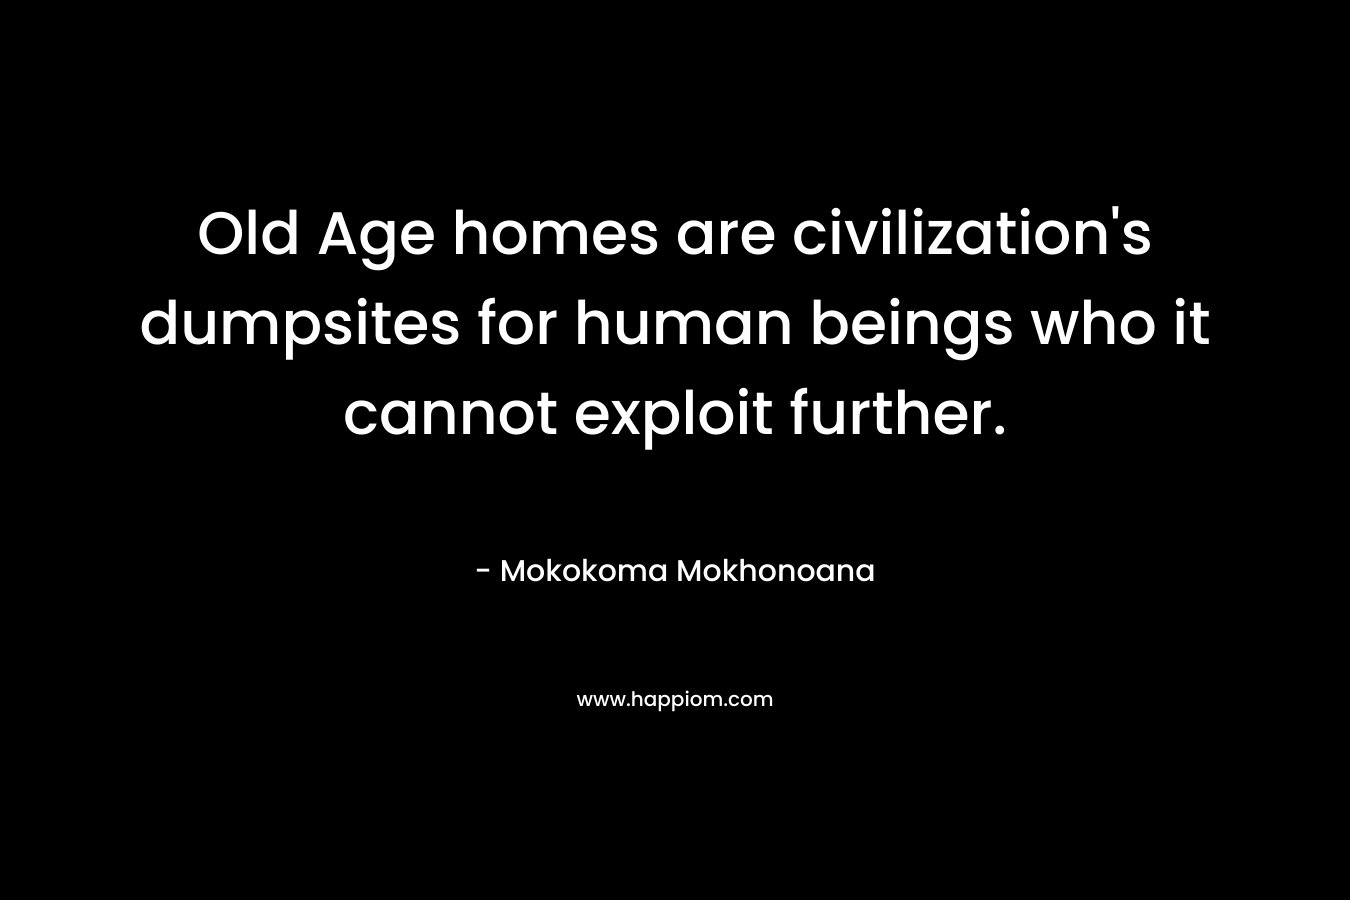 Old Age homes are civilization’s dumpsites for human beings who it cannot exploit further. – Mokokoma Mokhonoana